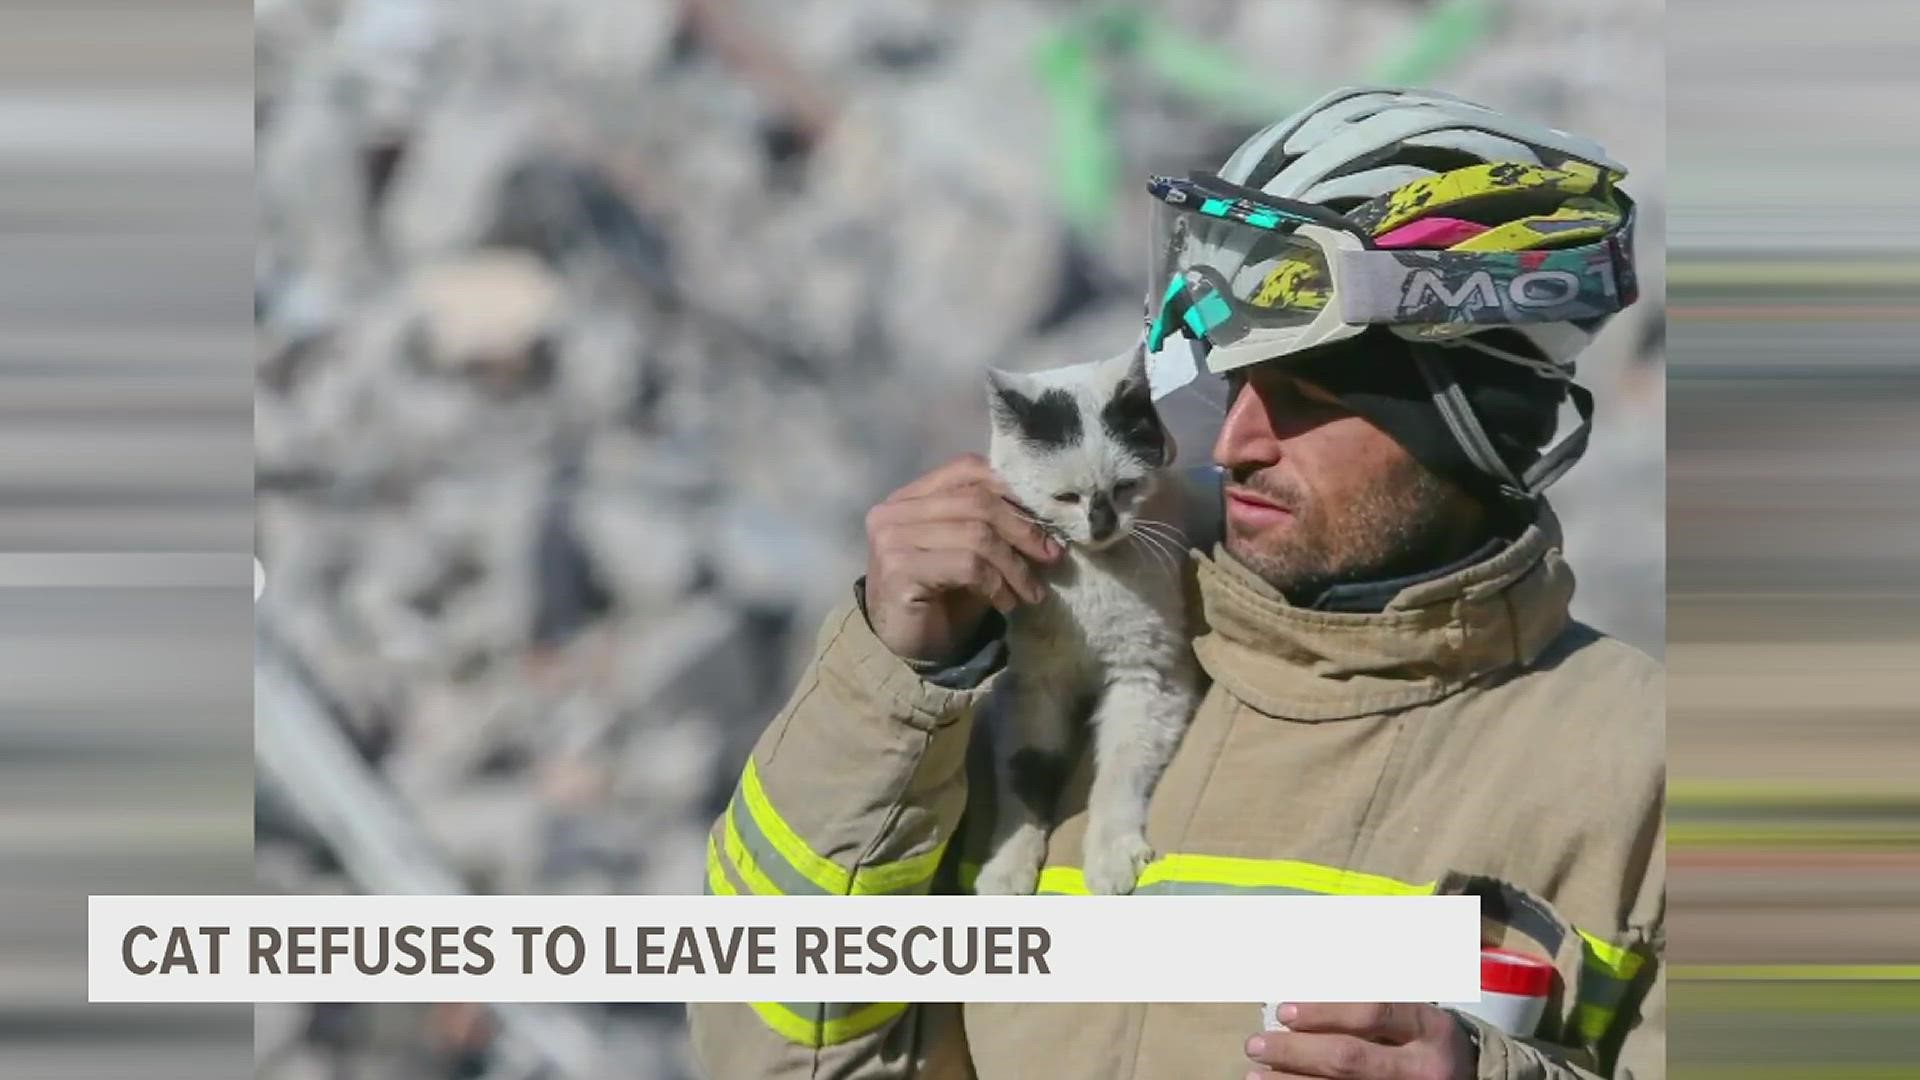 A cat was rescued from being trapped under rubble of a collapsed building for 10 days and nights. After being found, a Turkish firefighter adopted the kitty.